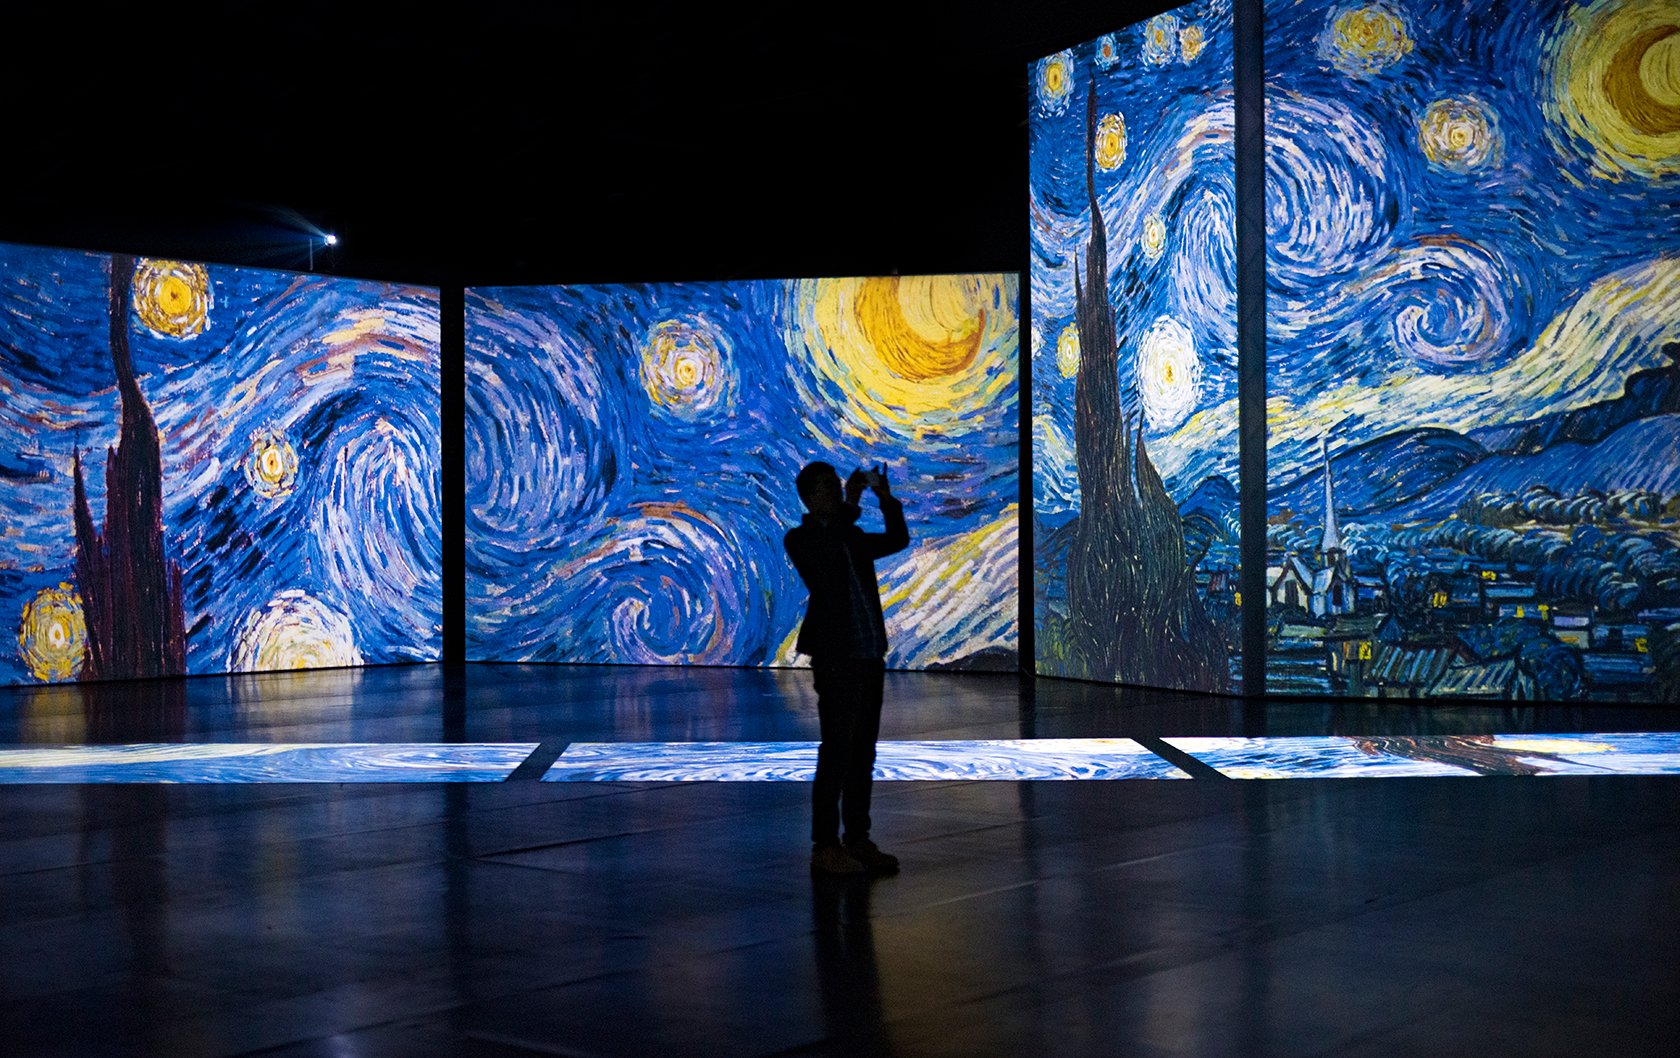 Two Not to Miss Van Gogh Immersive Experiences in London